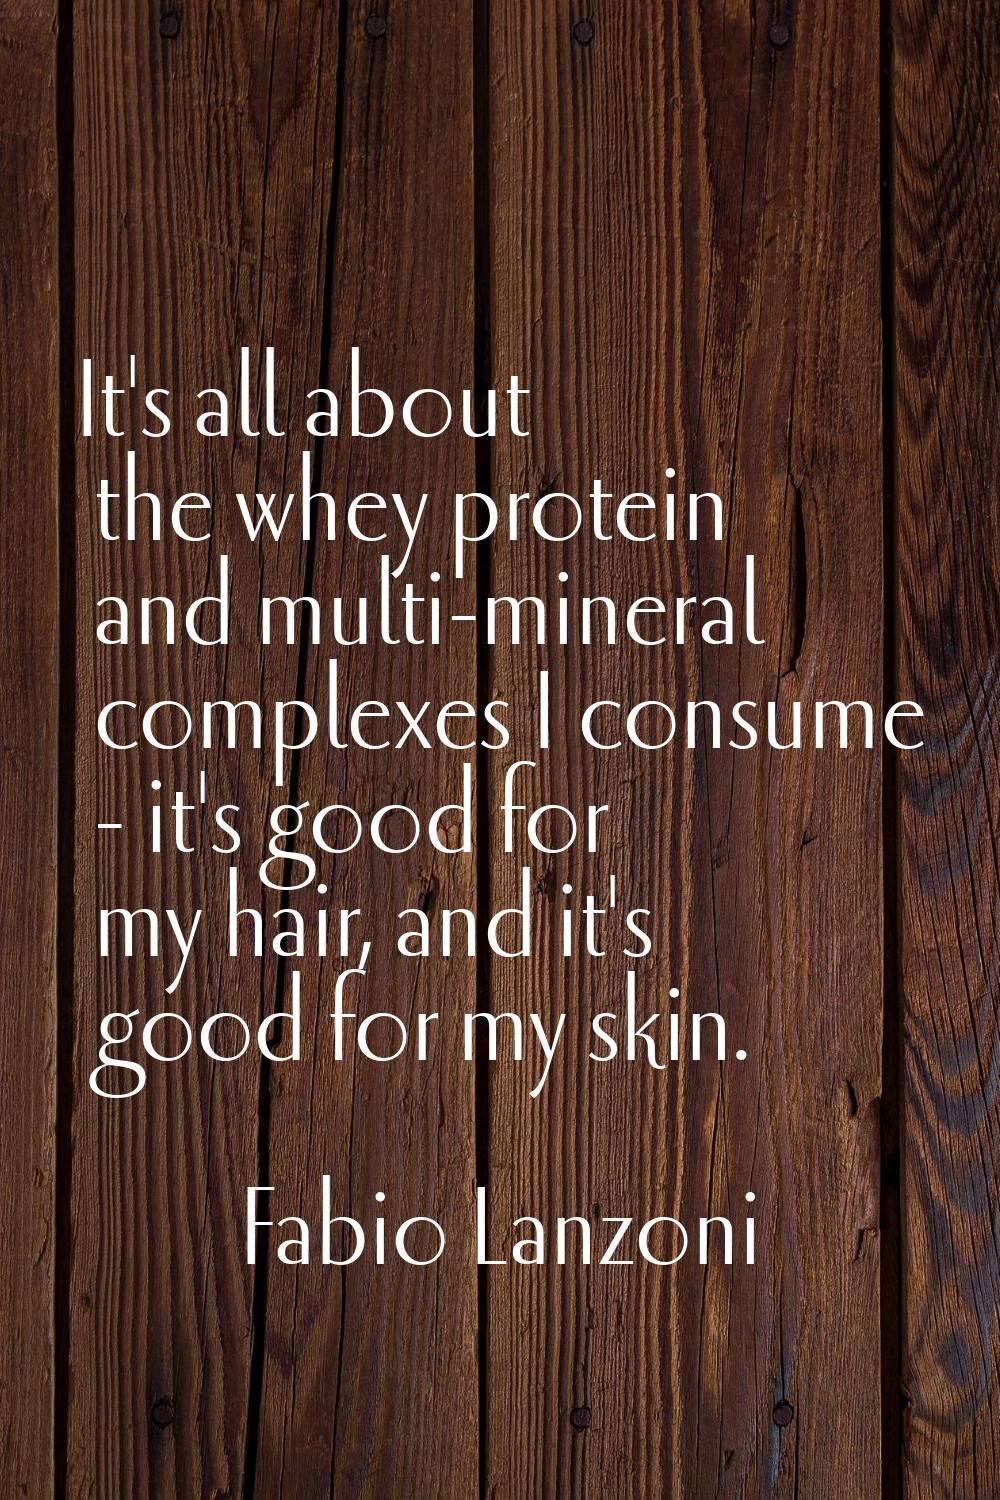 It's all about the whey protein and multi-mineral complexes I consume - it's good for my hair, and 